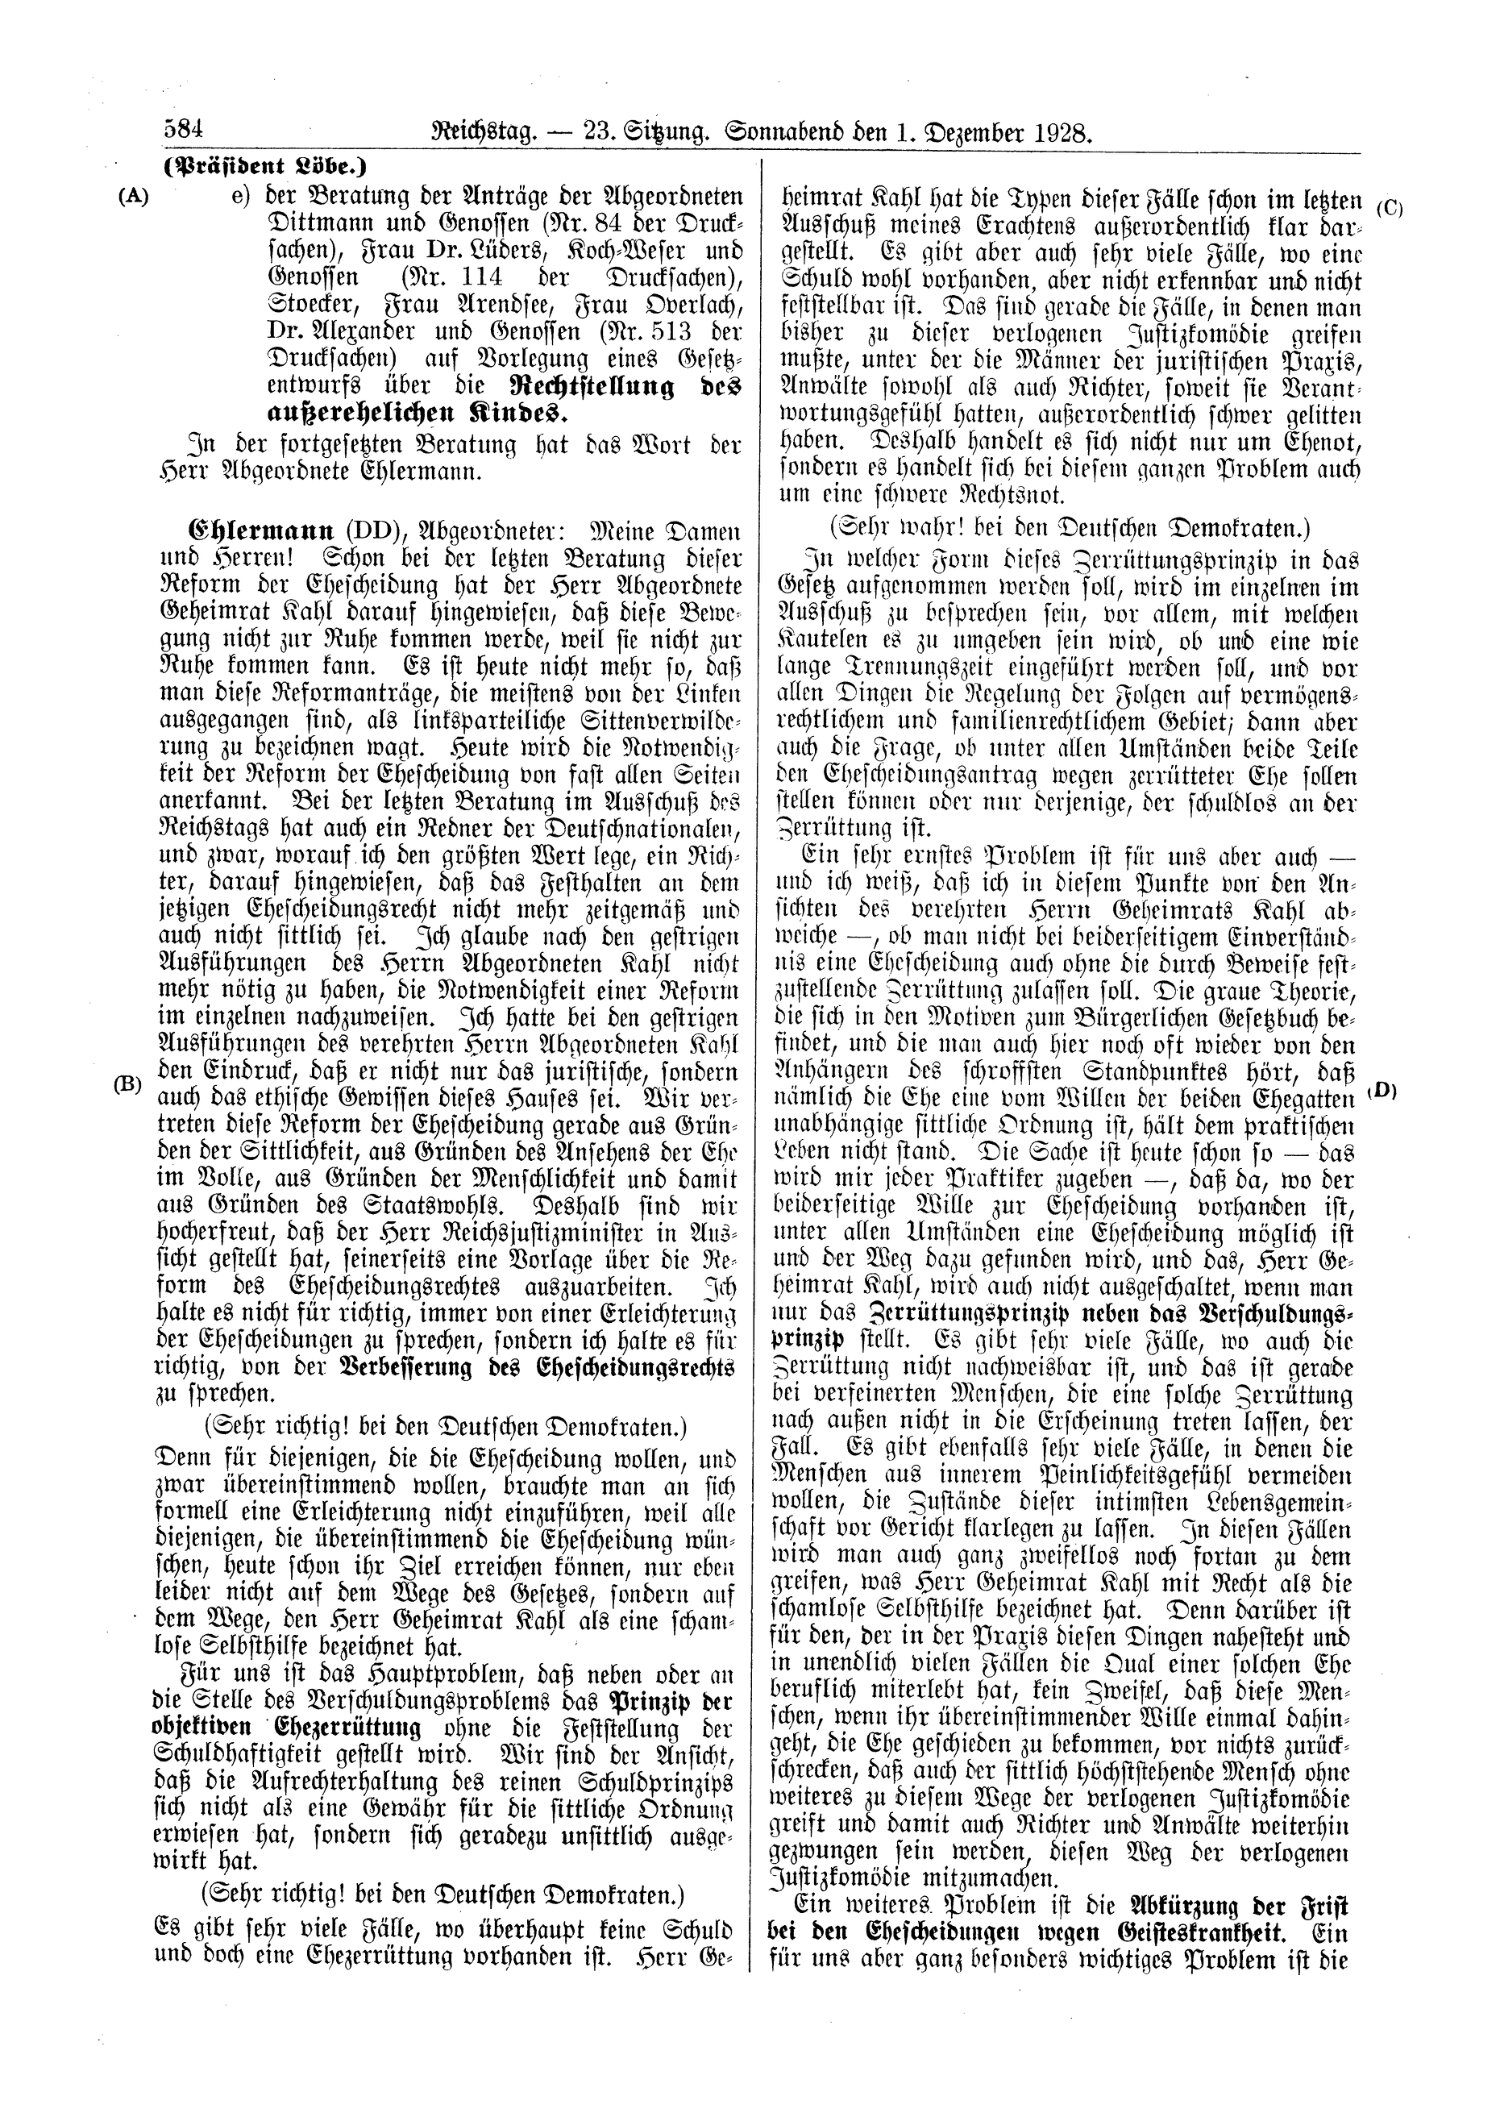 Scan of page 584